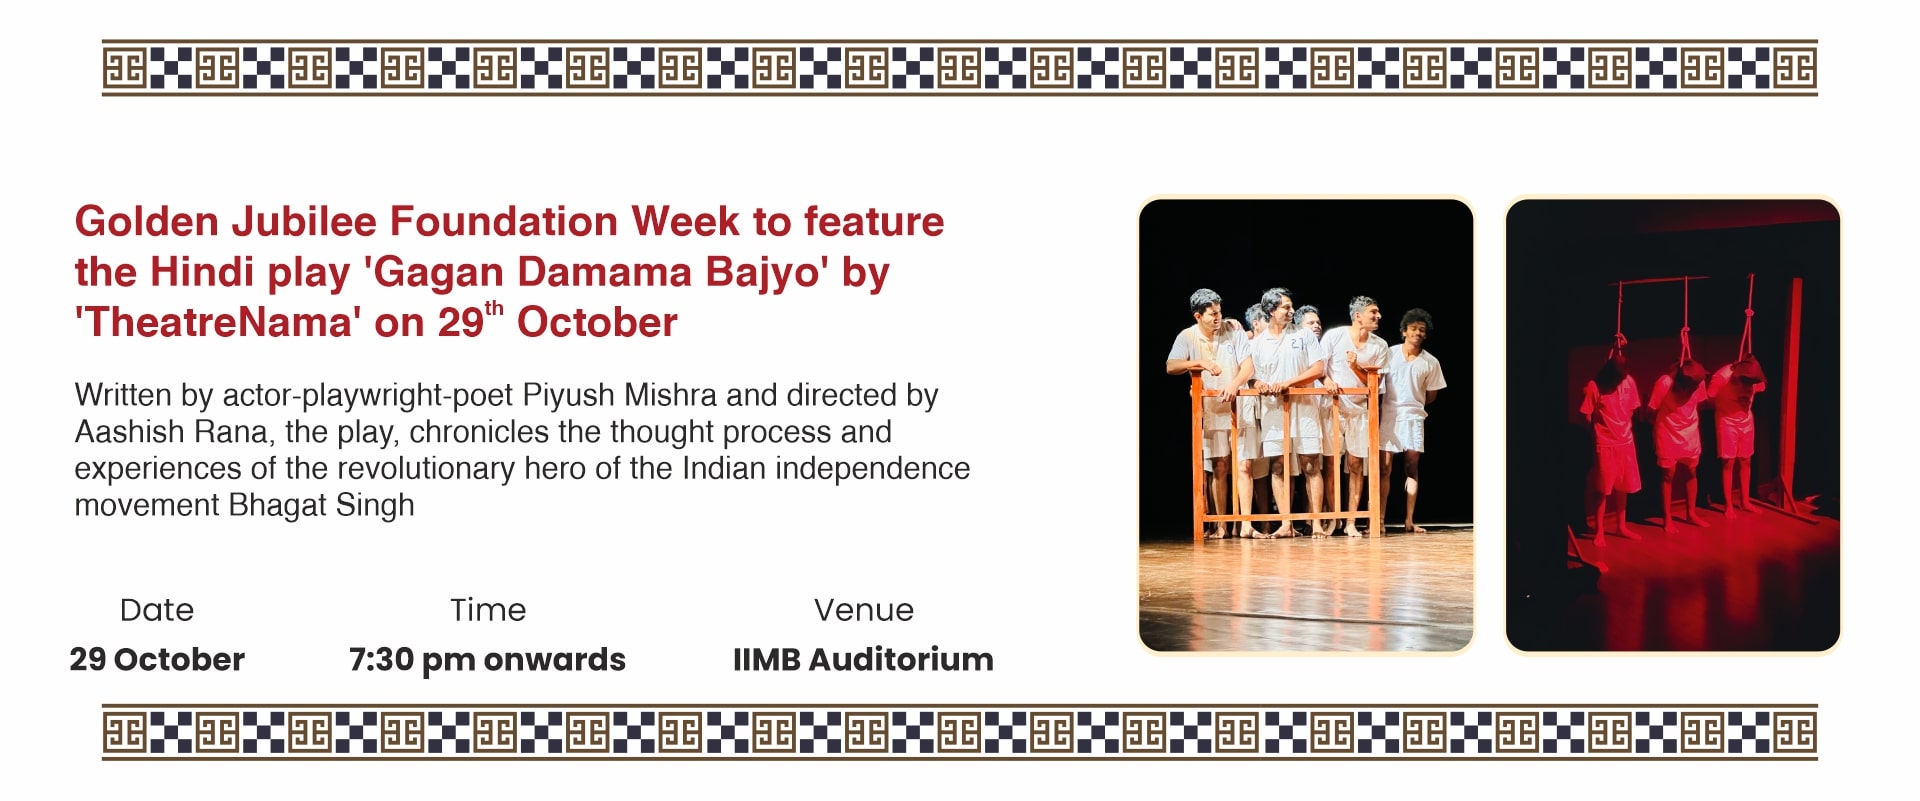 Golden Jubilee Foundation Week to feature the Hindi play ‘Gagan Damama Bajyo’ by ‘TheatreNama’ on 29th October